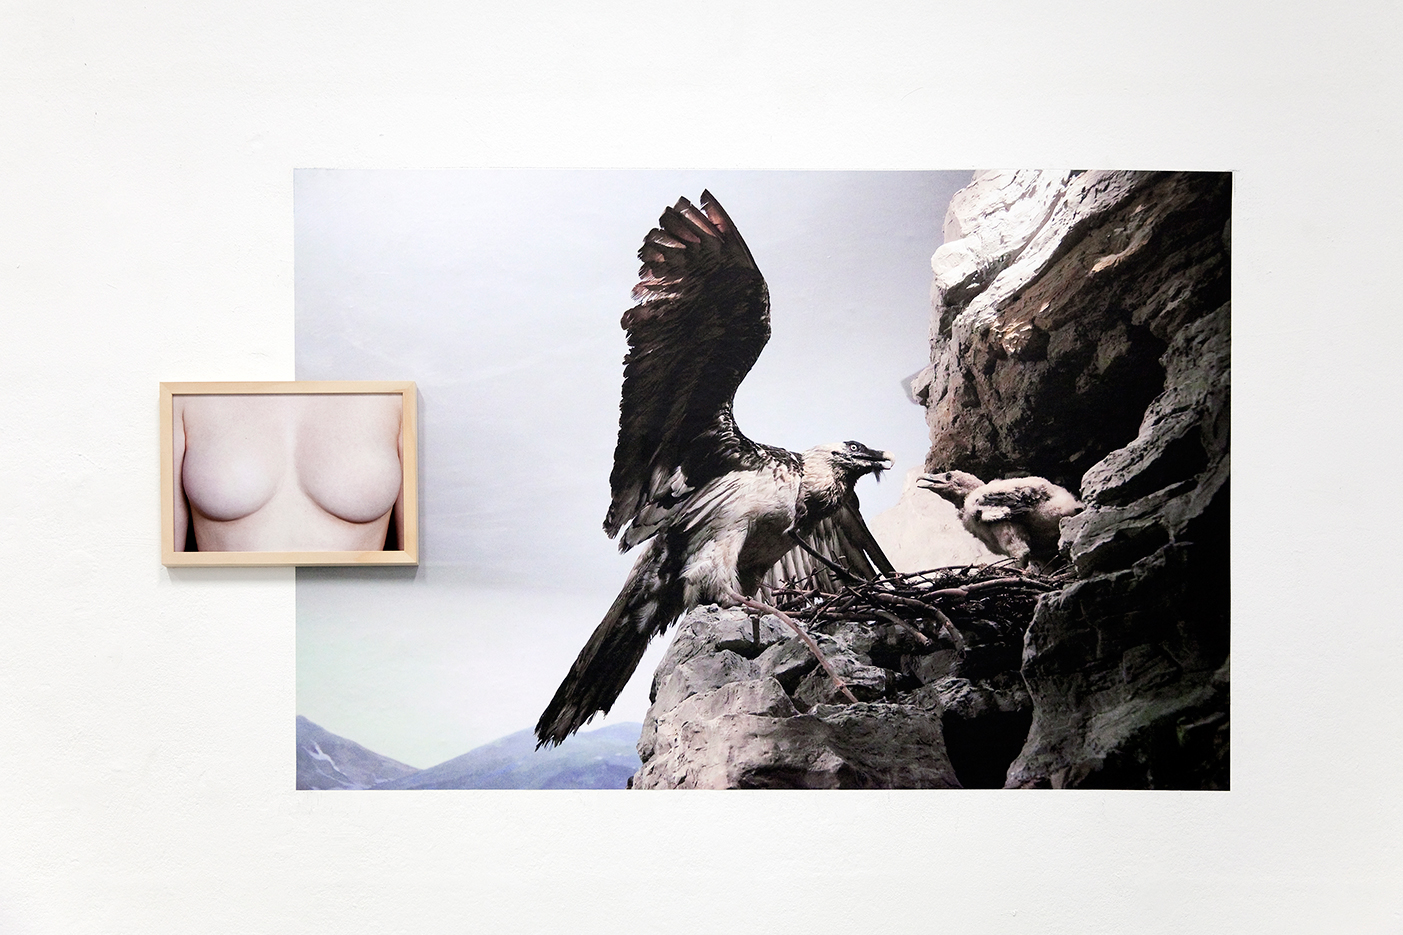 installationview - deatial befangen: a small, framed image of breasts without niplles hangs on top of a pasted large image of a stuffed eagle feeding its stuffed baby in nest on fake rocks and a painted landskape in the background